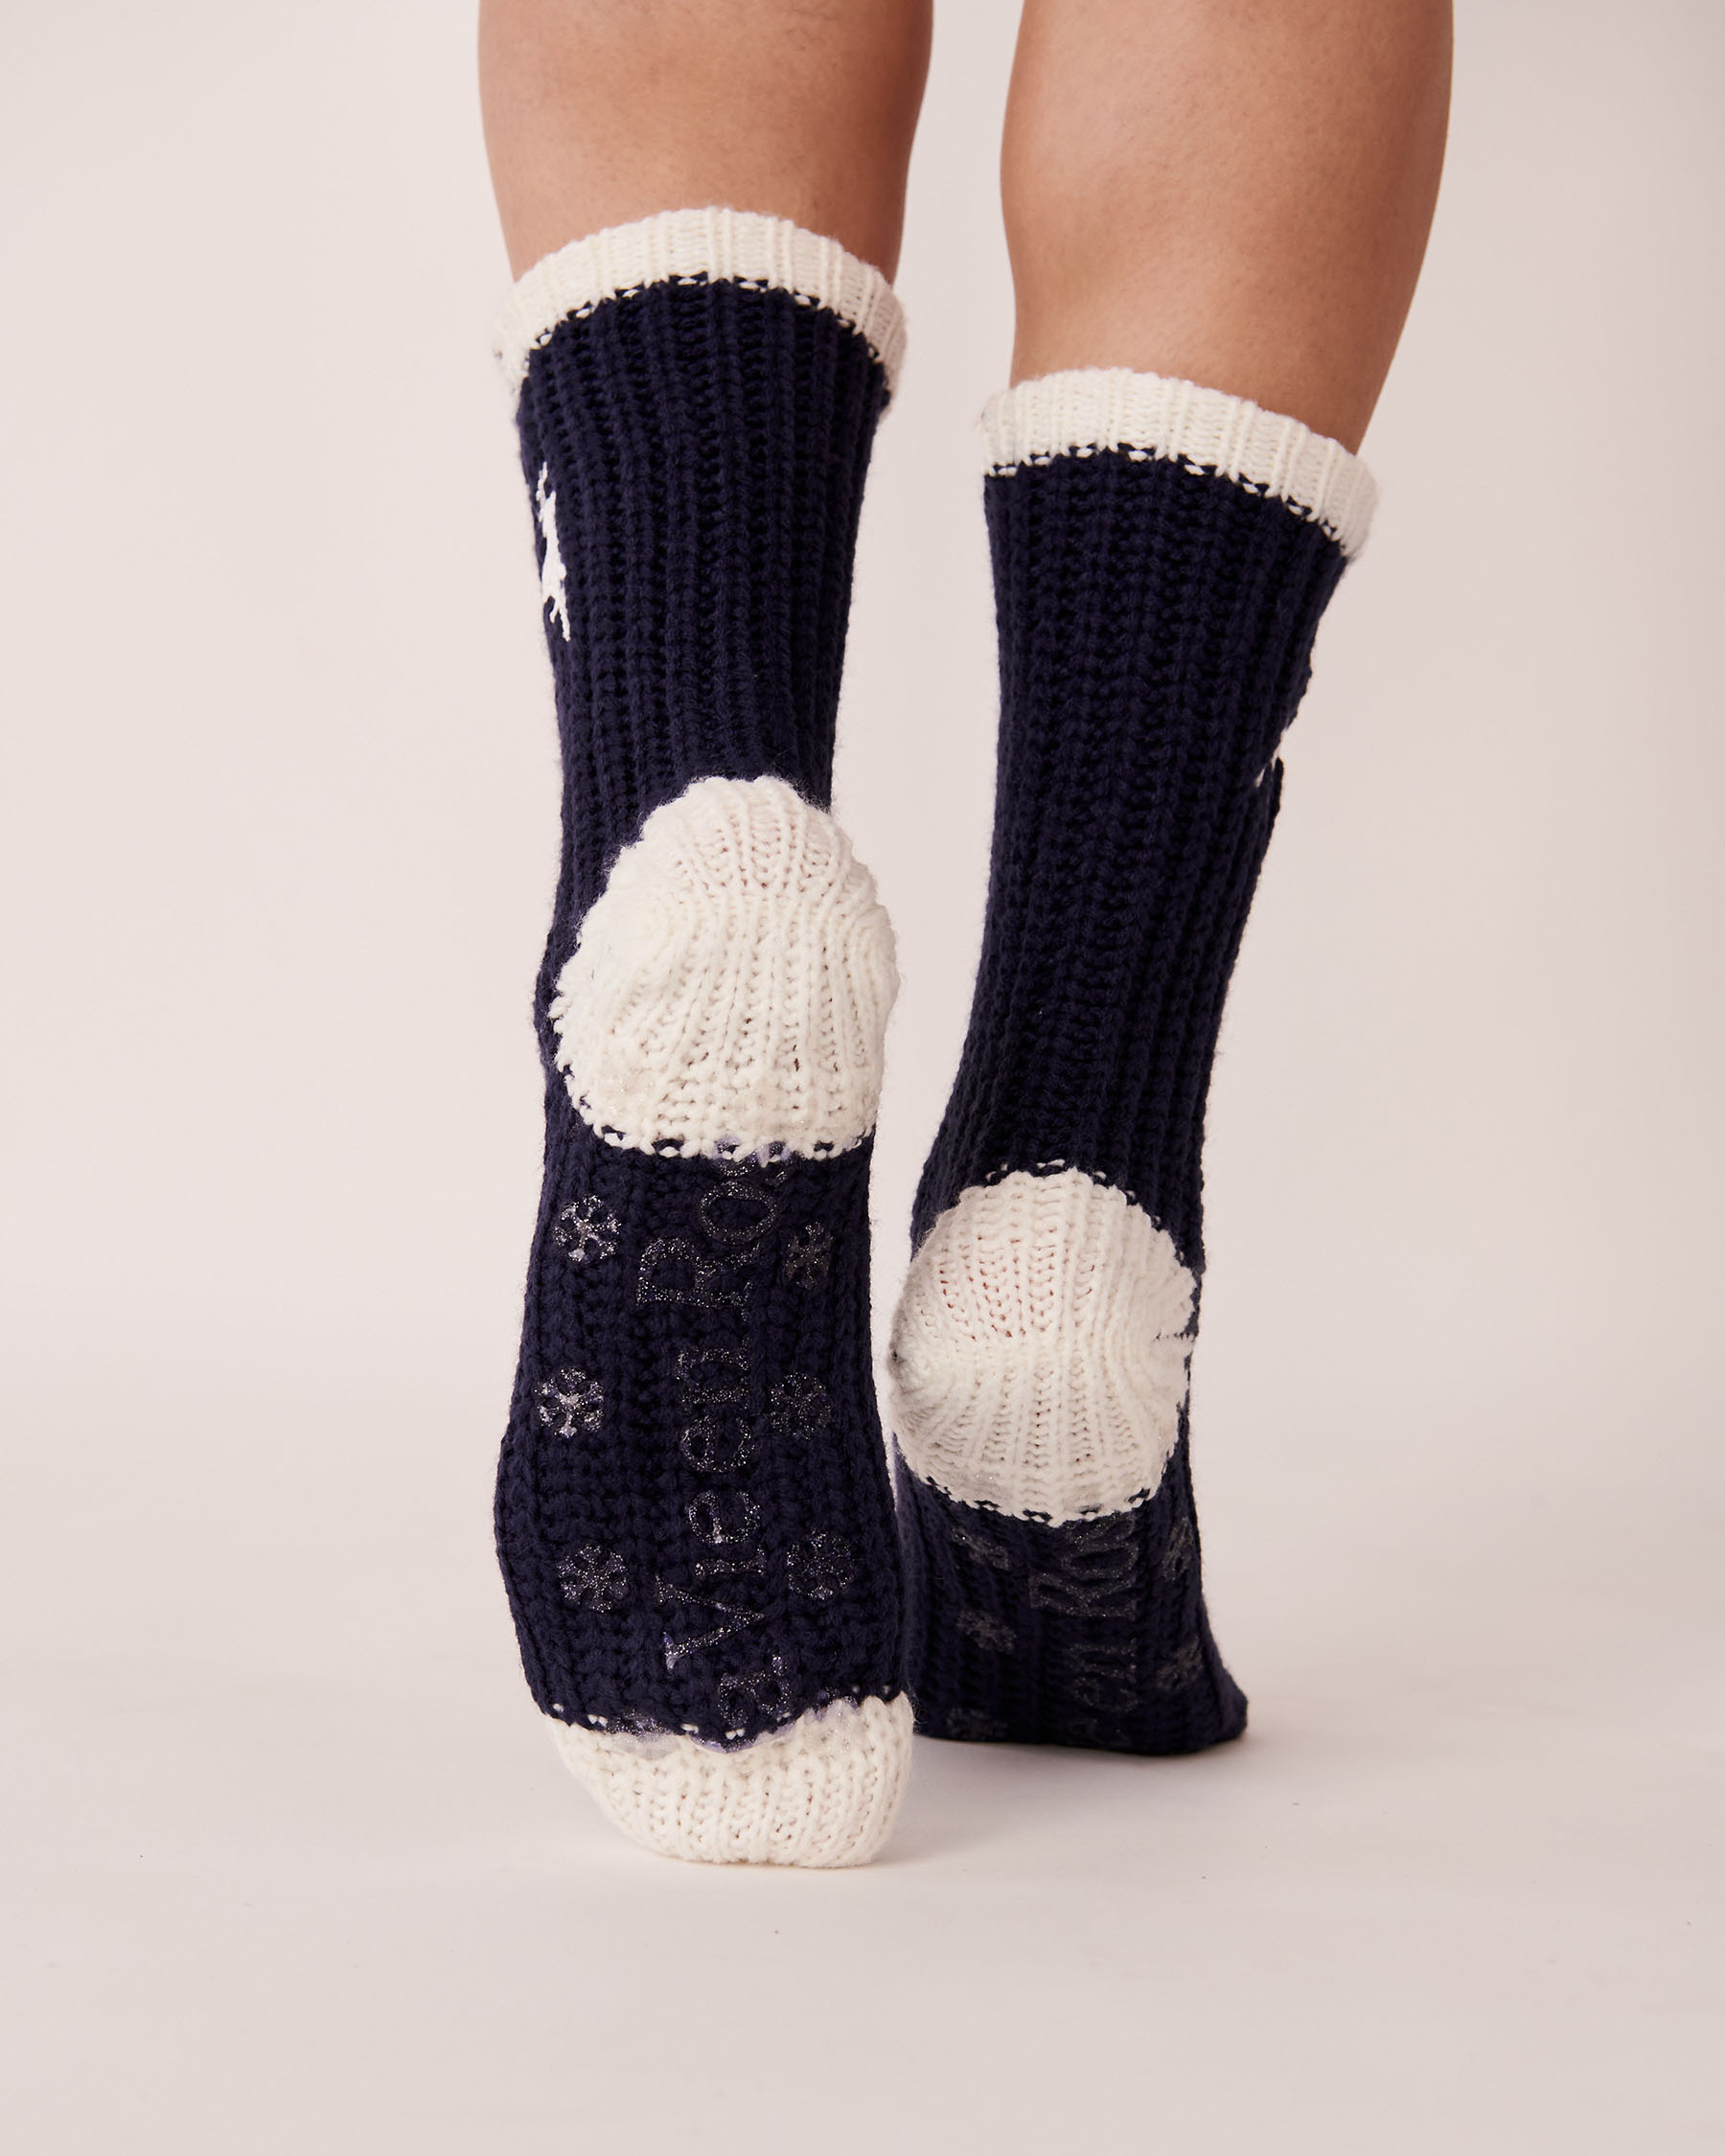 LA VIE EN ROSE Knitted Socks with winter Embroidery Midnight sky 40700245 - View2